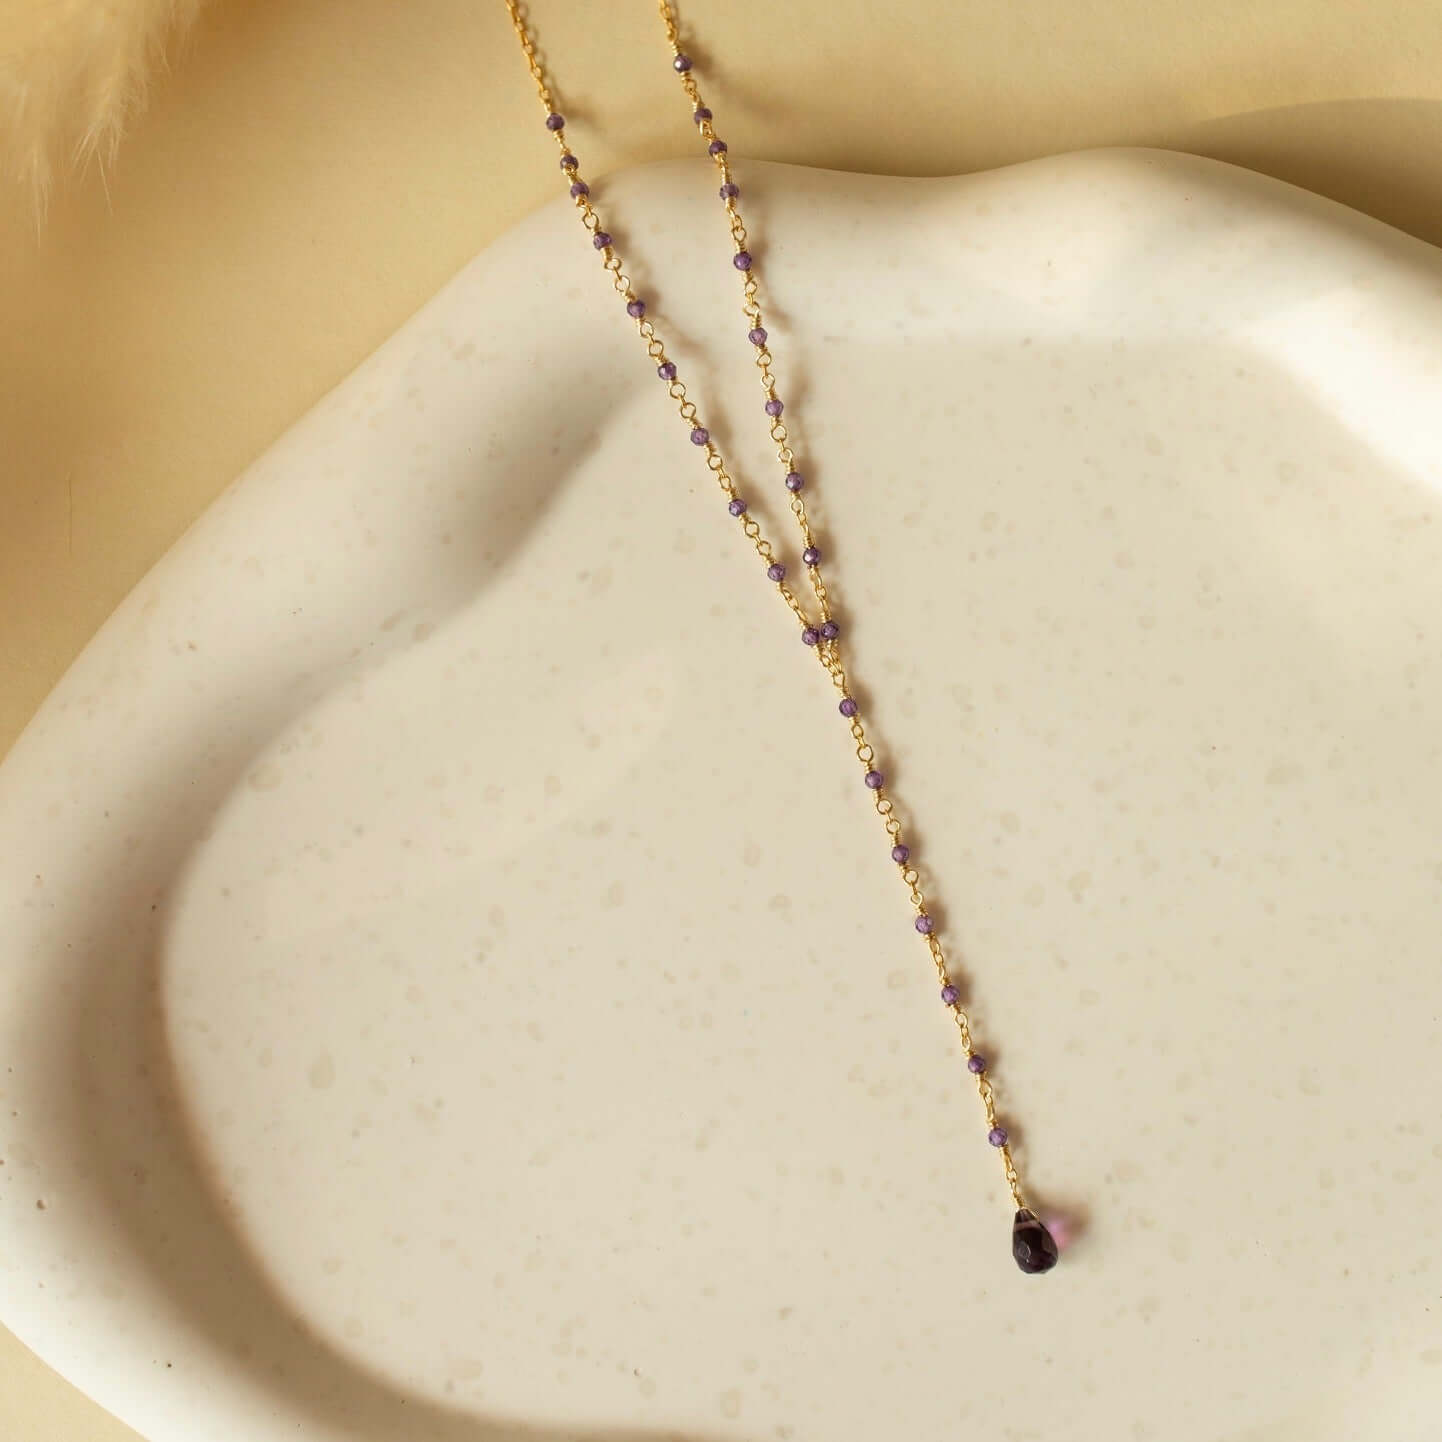 Laid-back amethyst necklace on clay—a touch of deep purple elegance and natural simplicity.